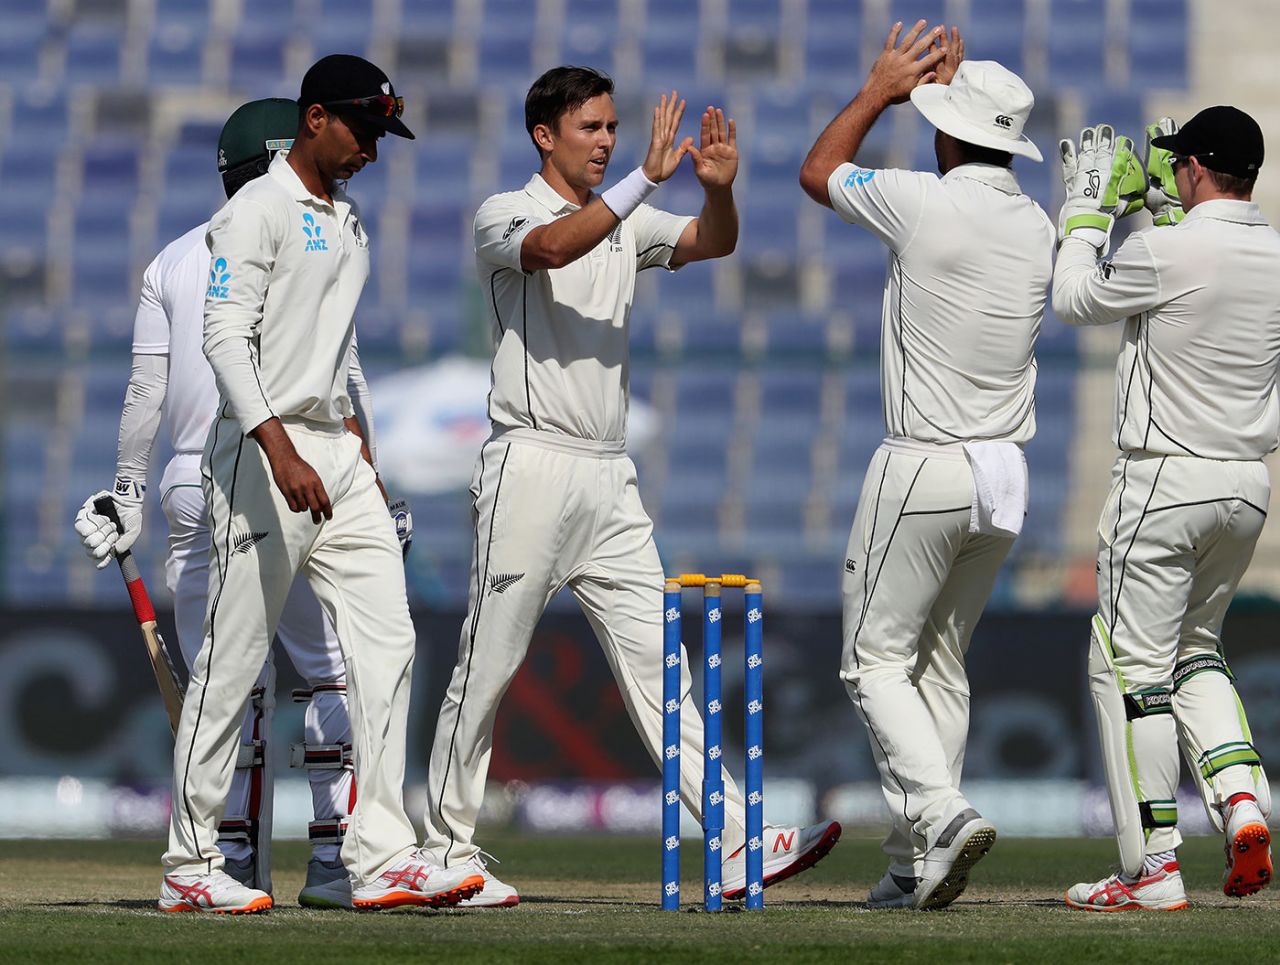 Trent Boult claimed the first wicket of Pakistan's innings, Pakistan v New Zealand, 3rd Test, Abu Dhabi, 2nd day, December 4, 2018